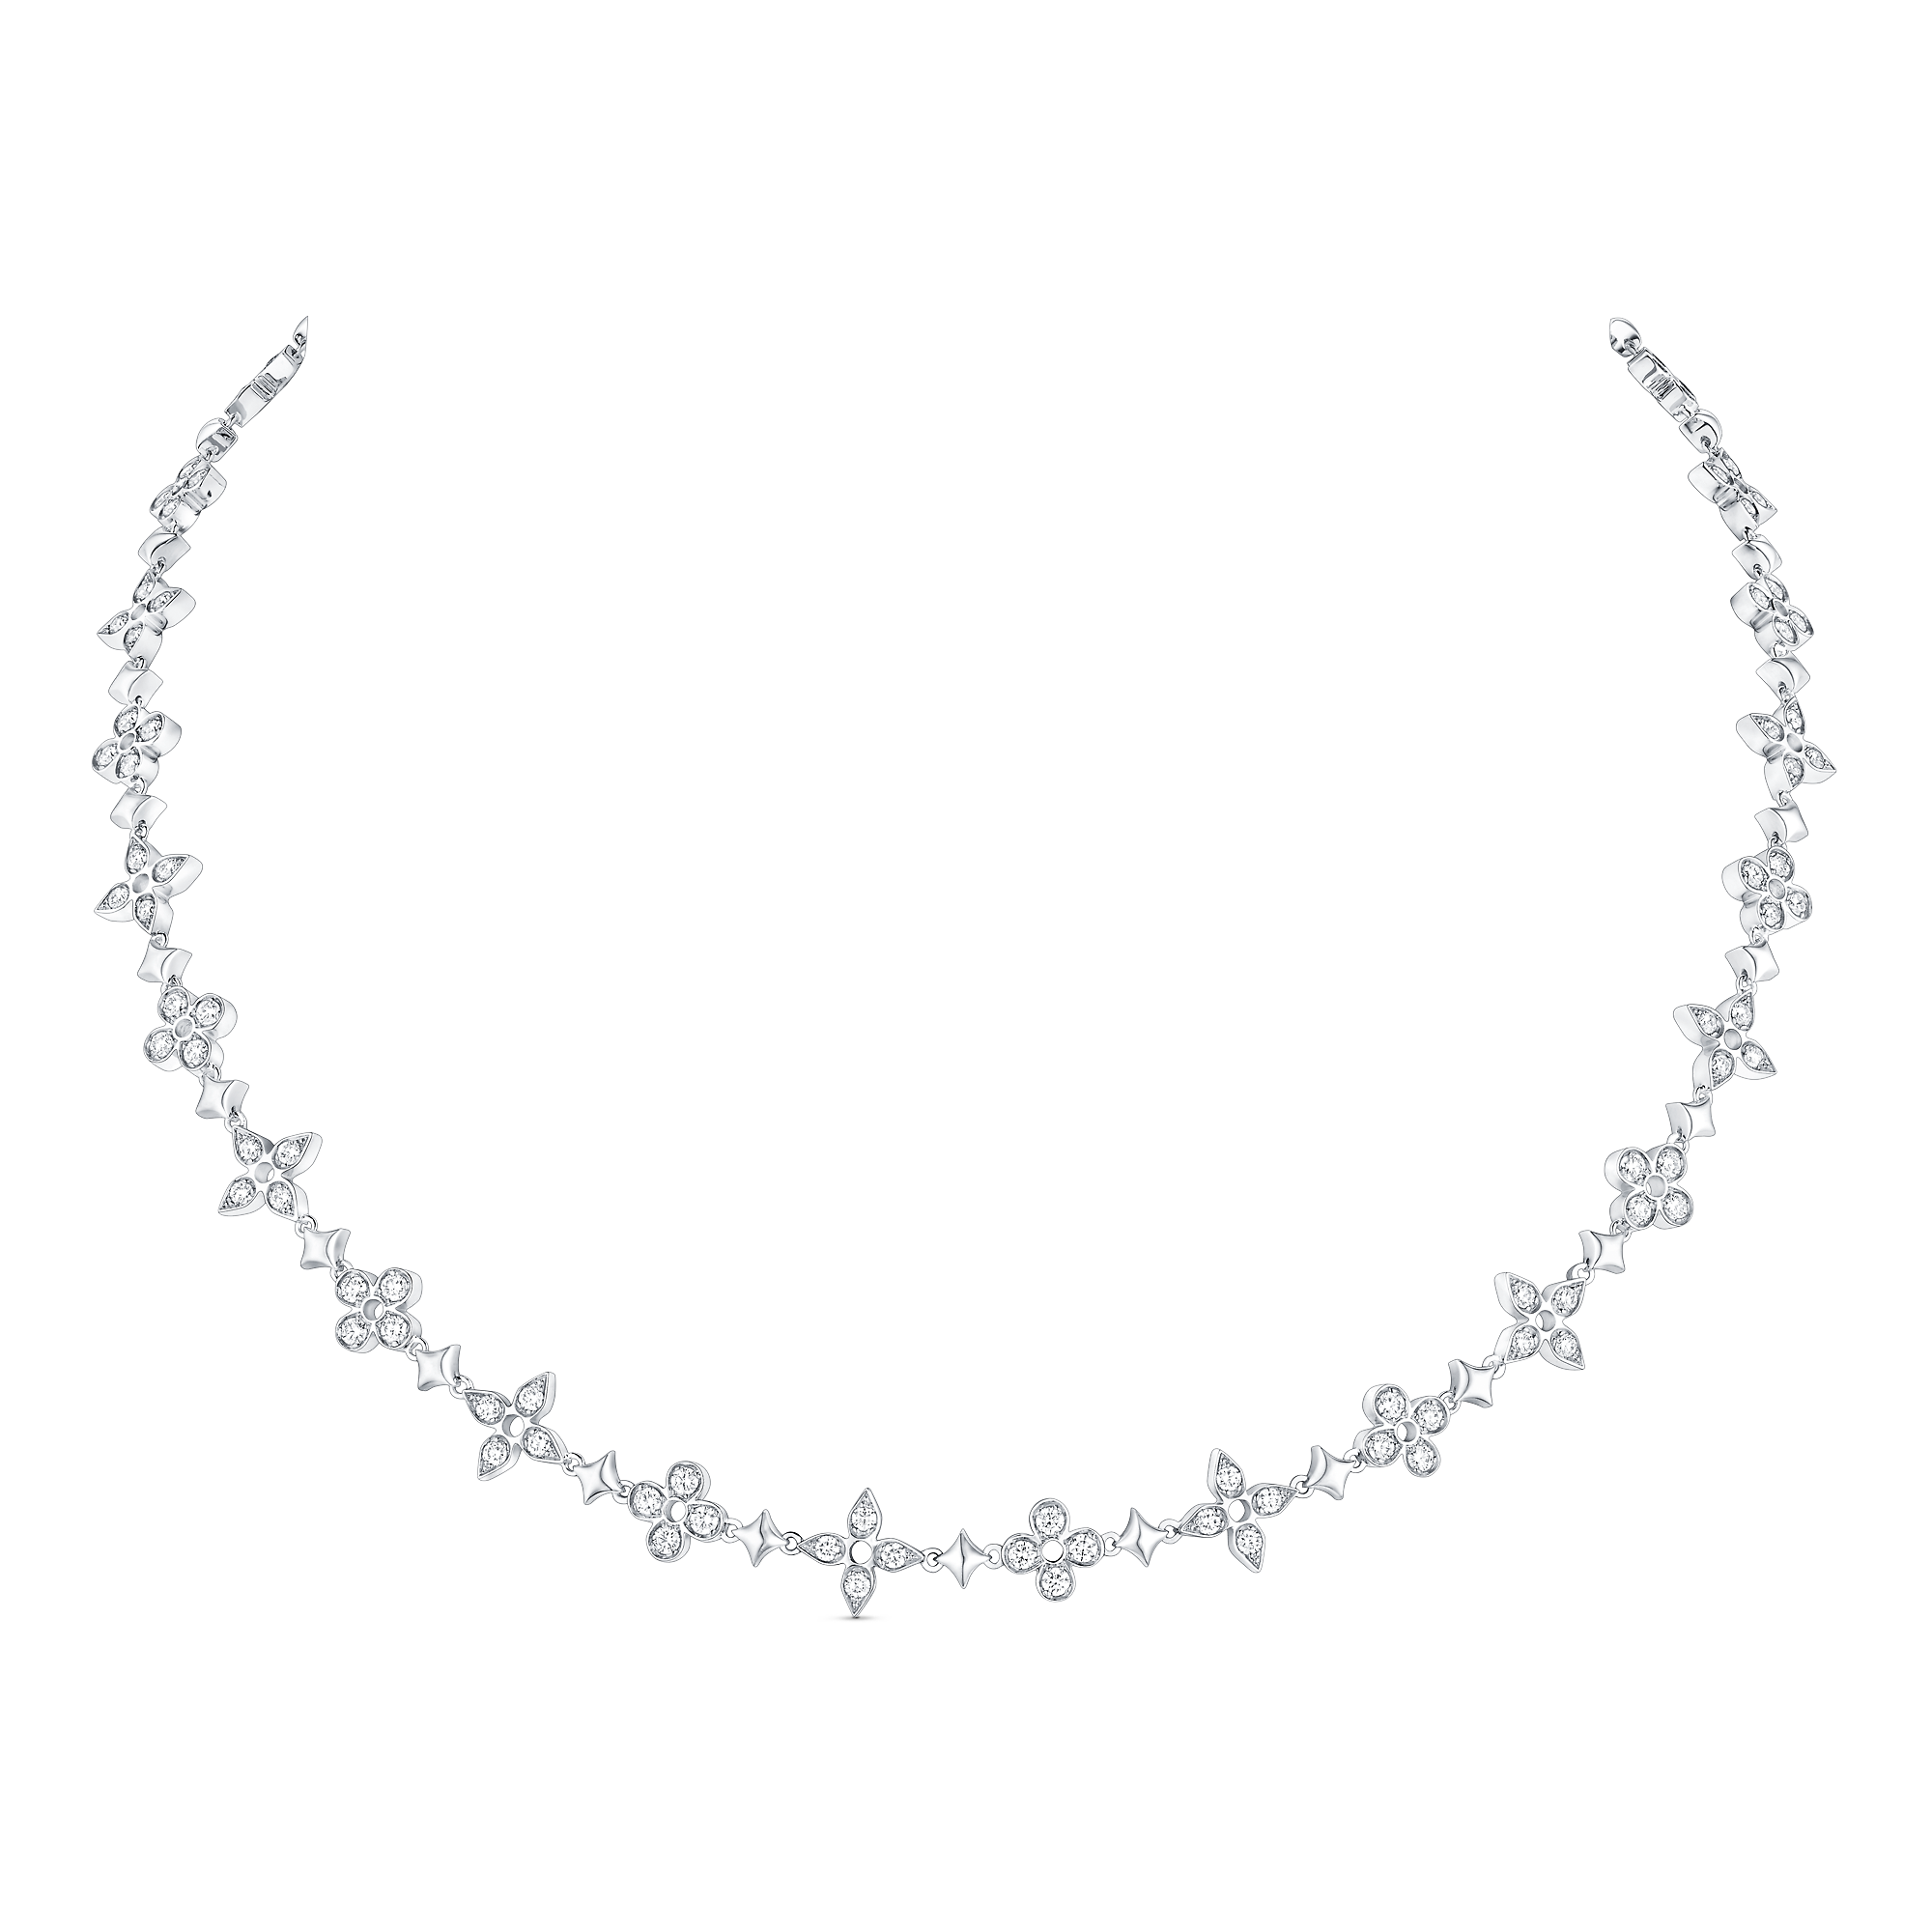 Louis Vuitton Dentelle One Row Necklace, White Gold And Diamonds – Jewelry – Categories Q94381